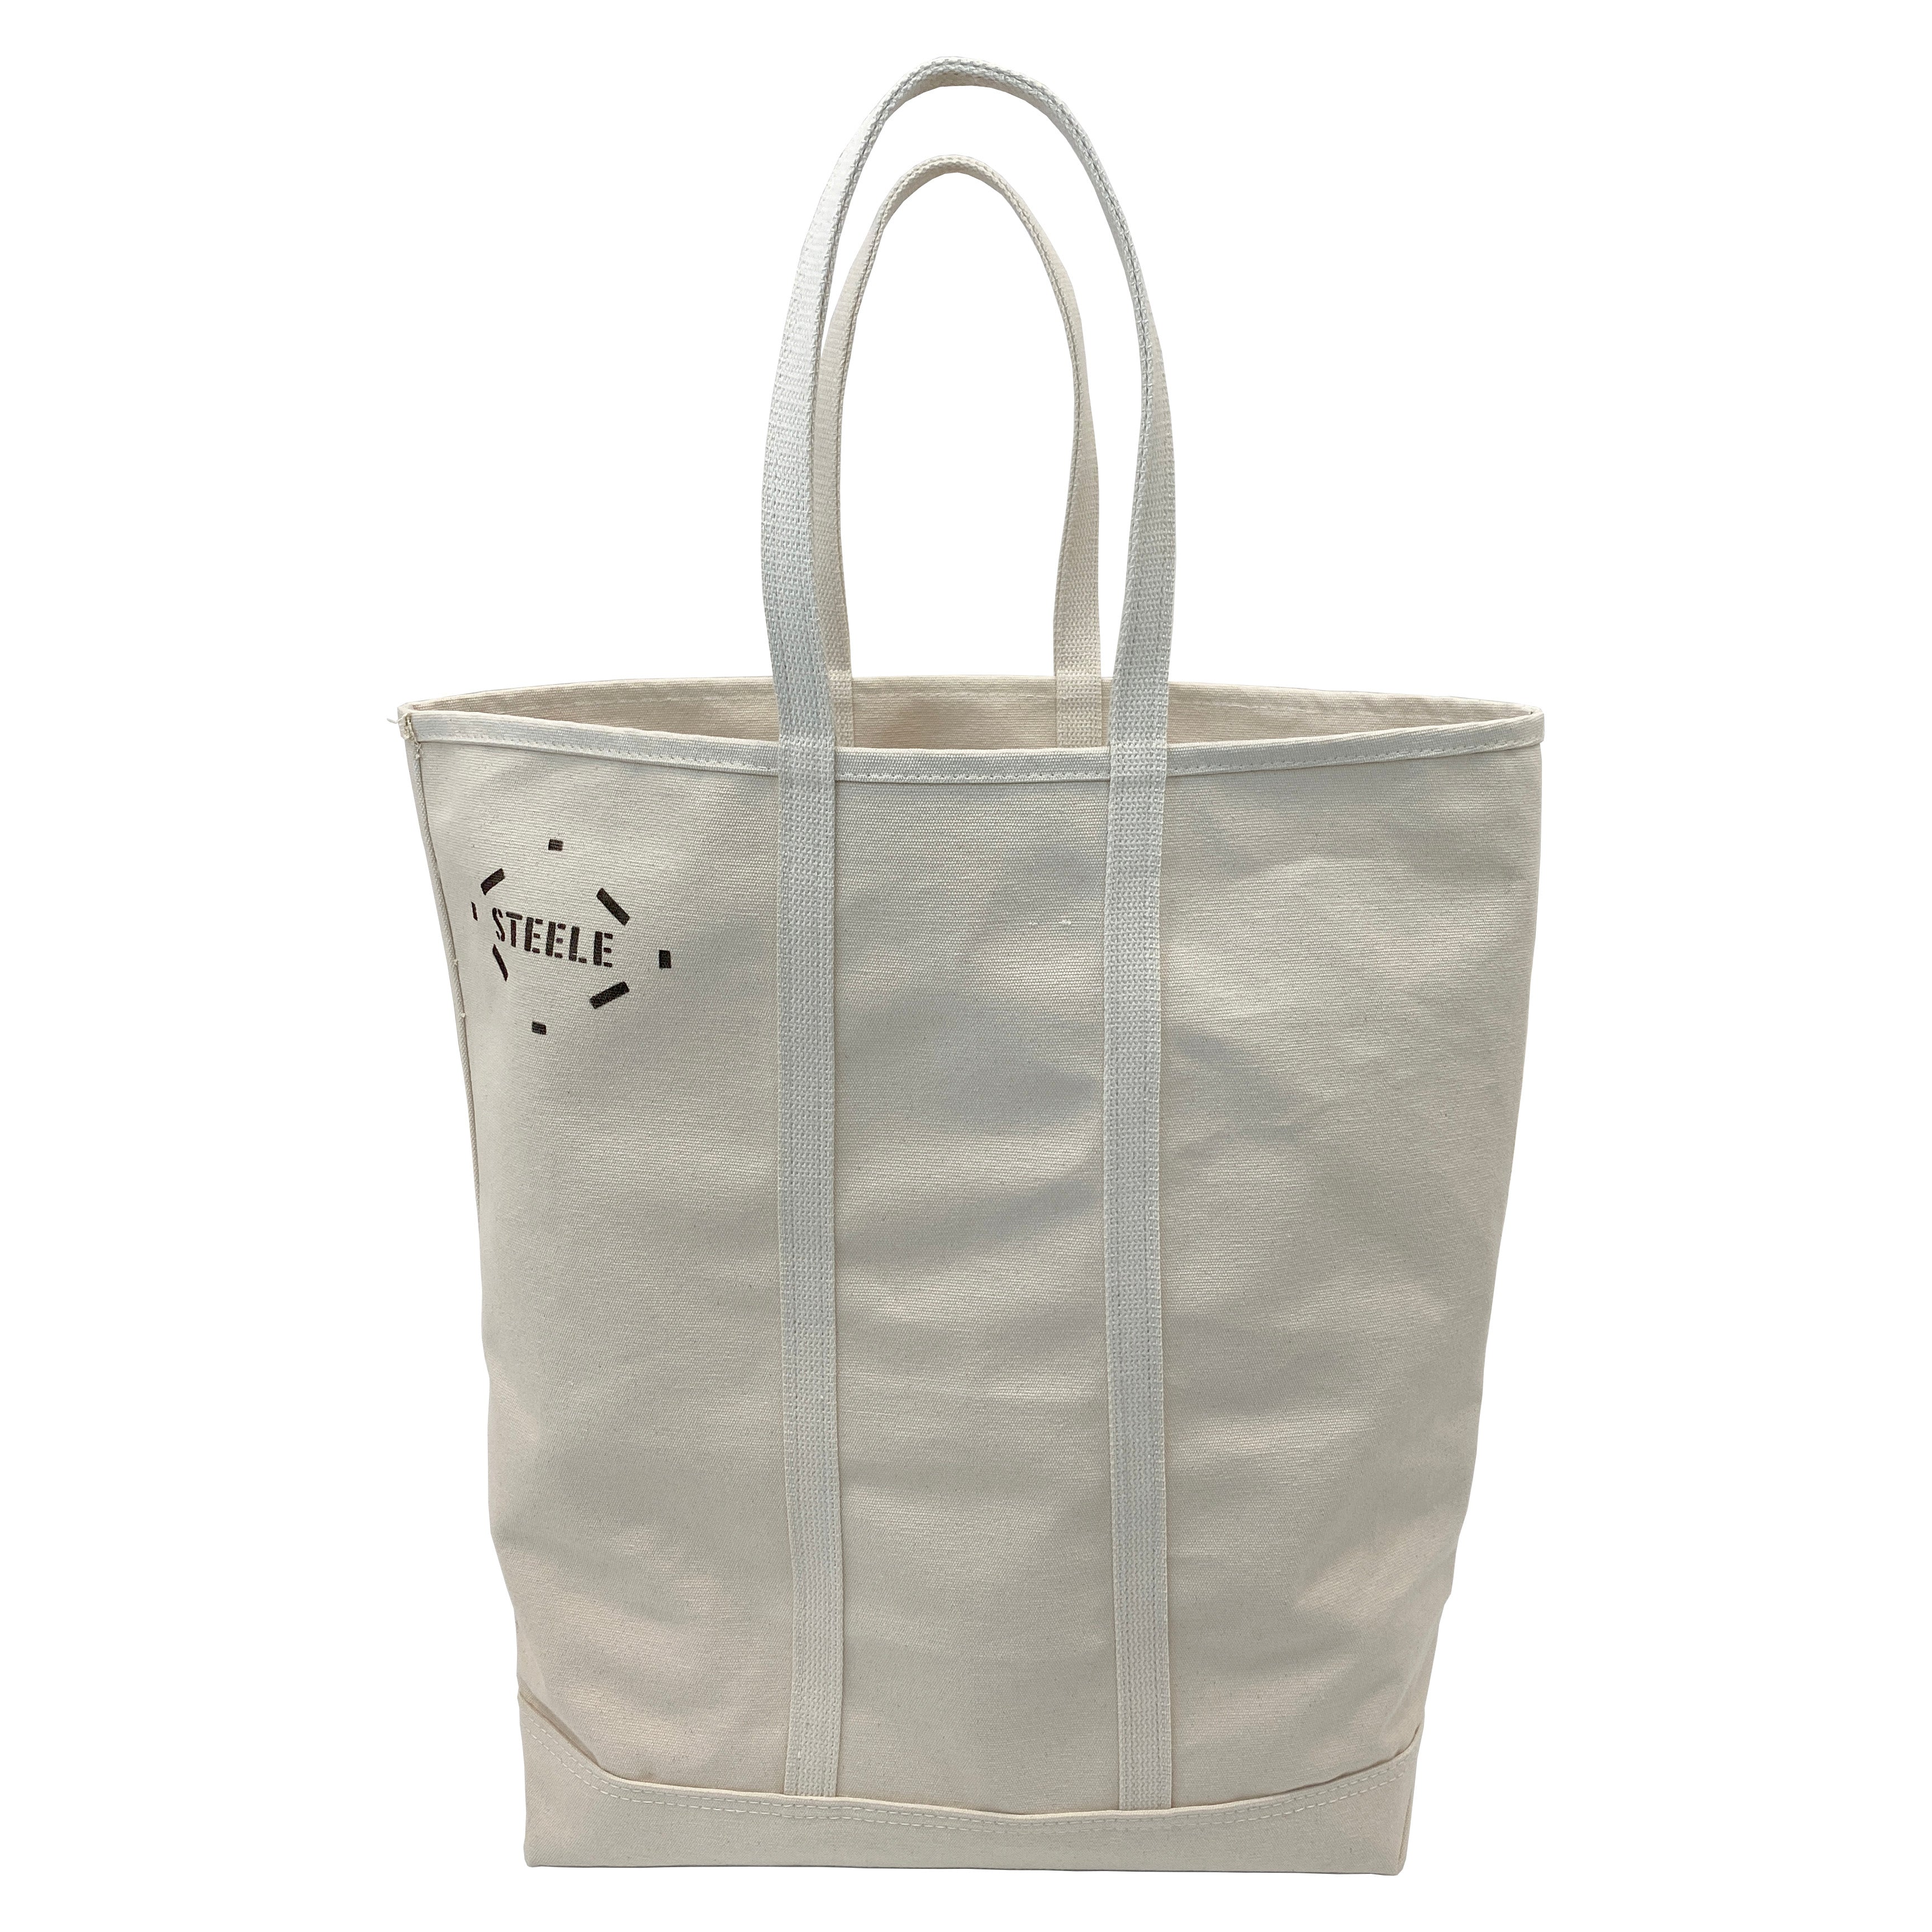 Steele Canvas Natural Canvas Tote Bag - Tall